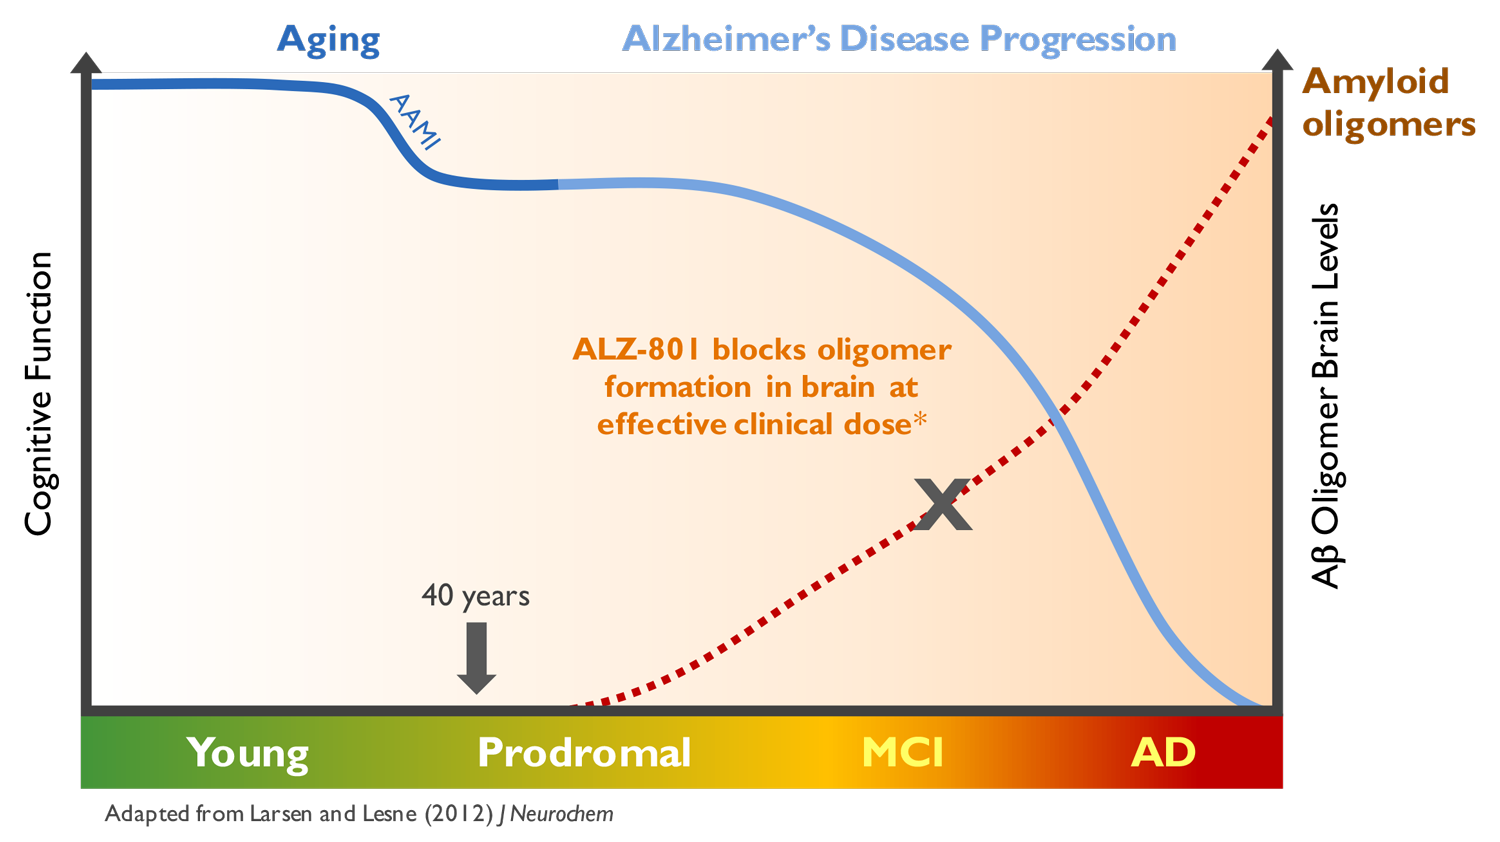 ALZ-801-Blocking-toxic-oligomers-in-Alzheimers-Alzheon_amyloid-plaques